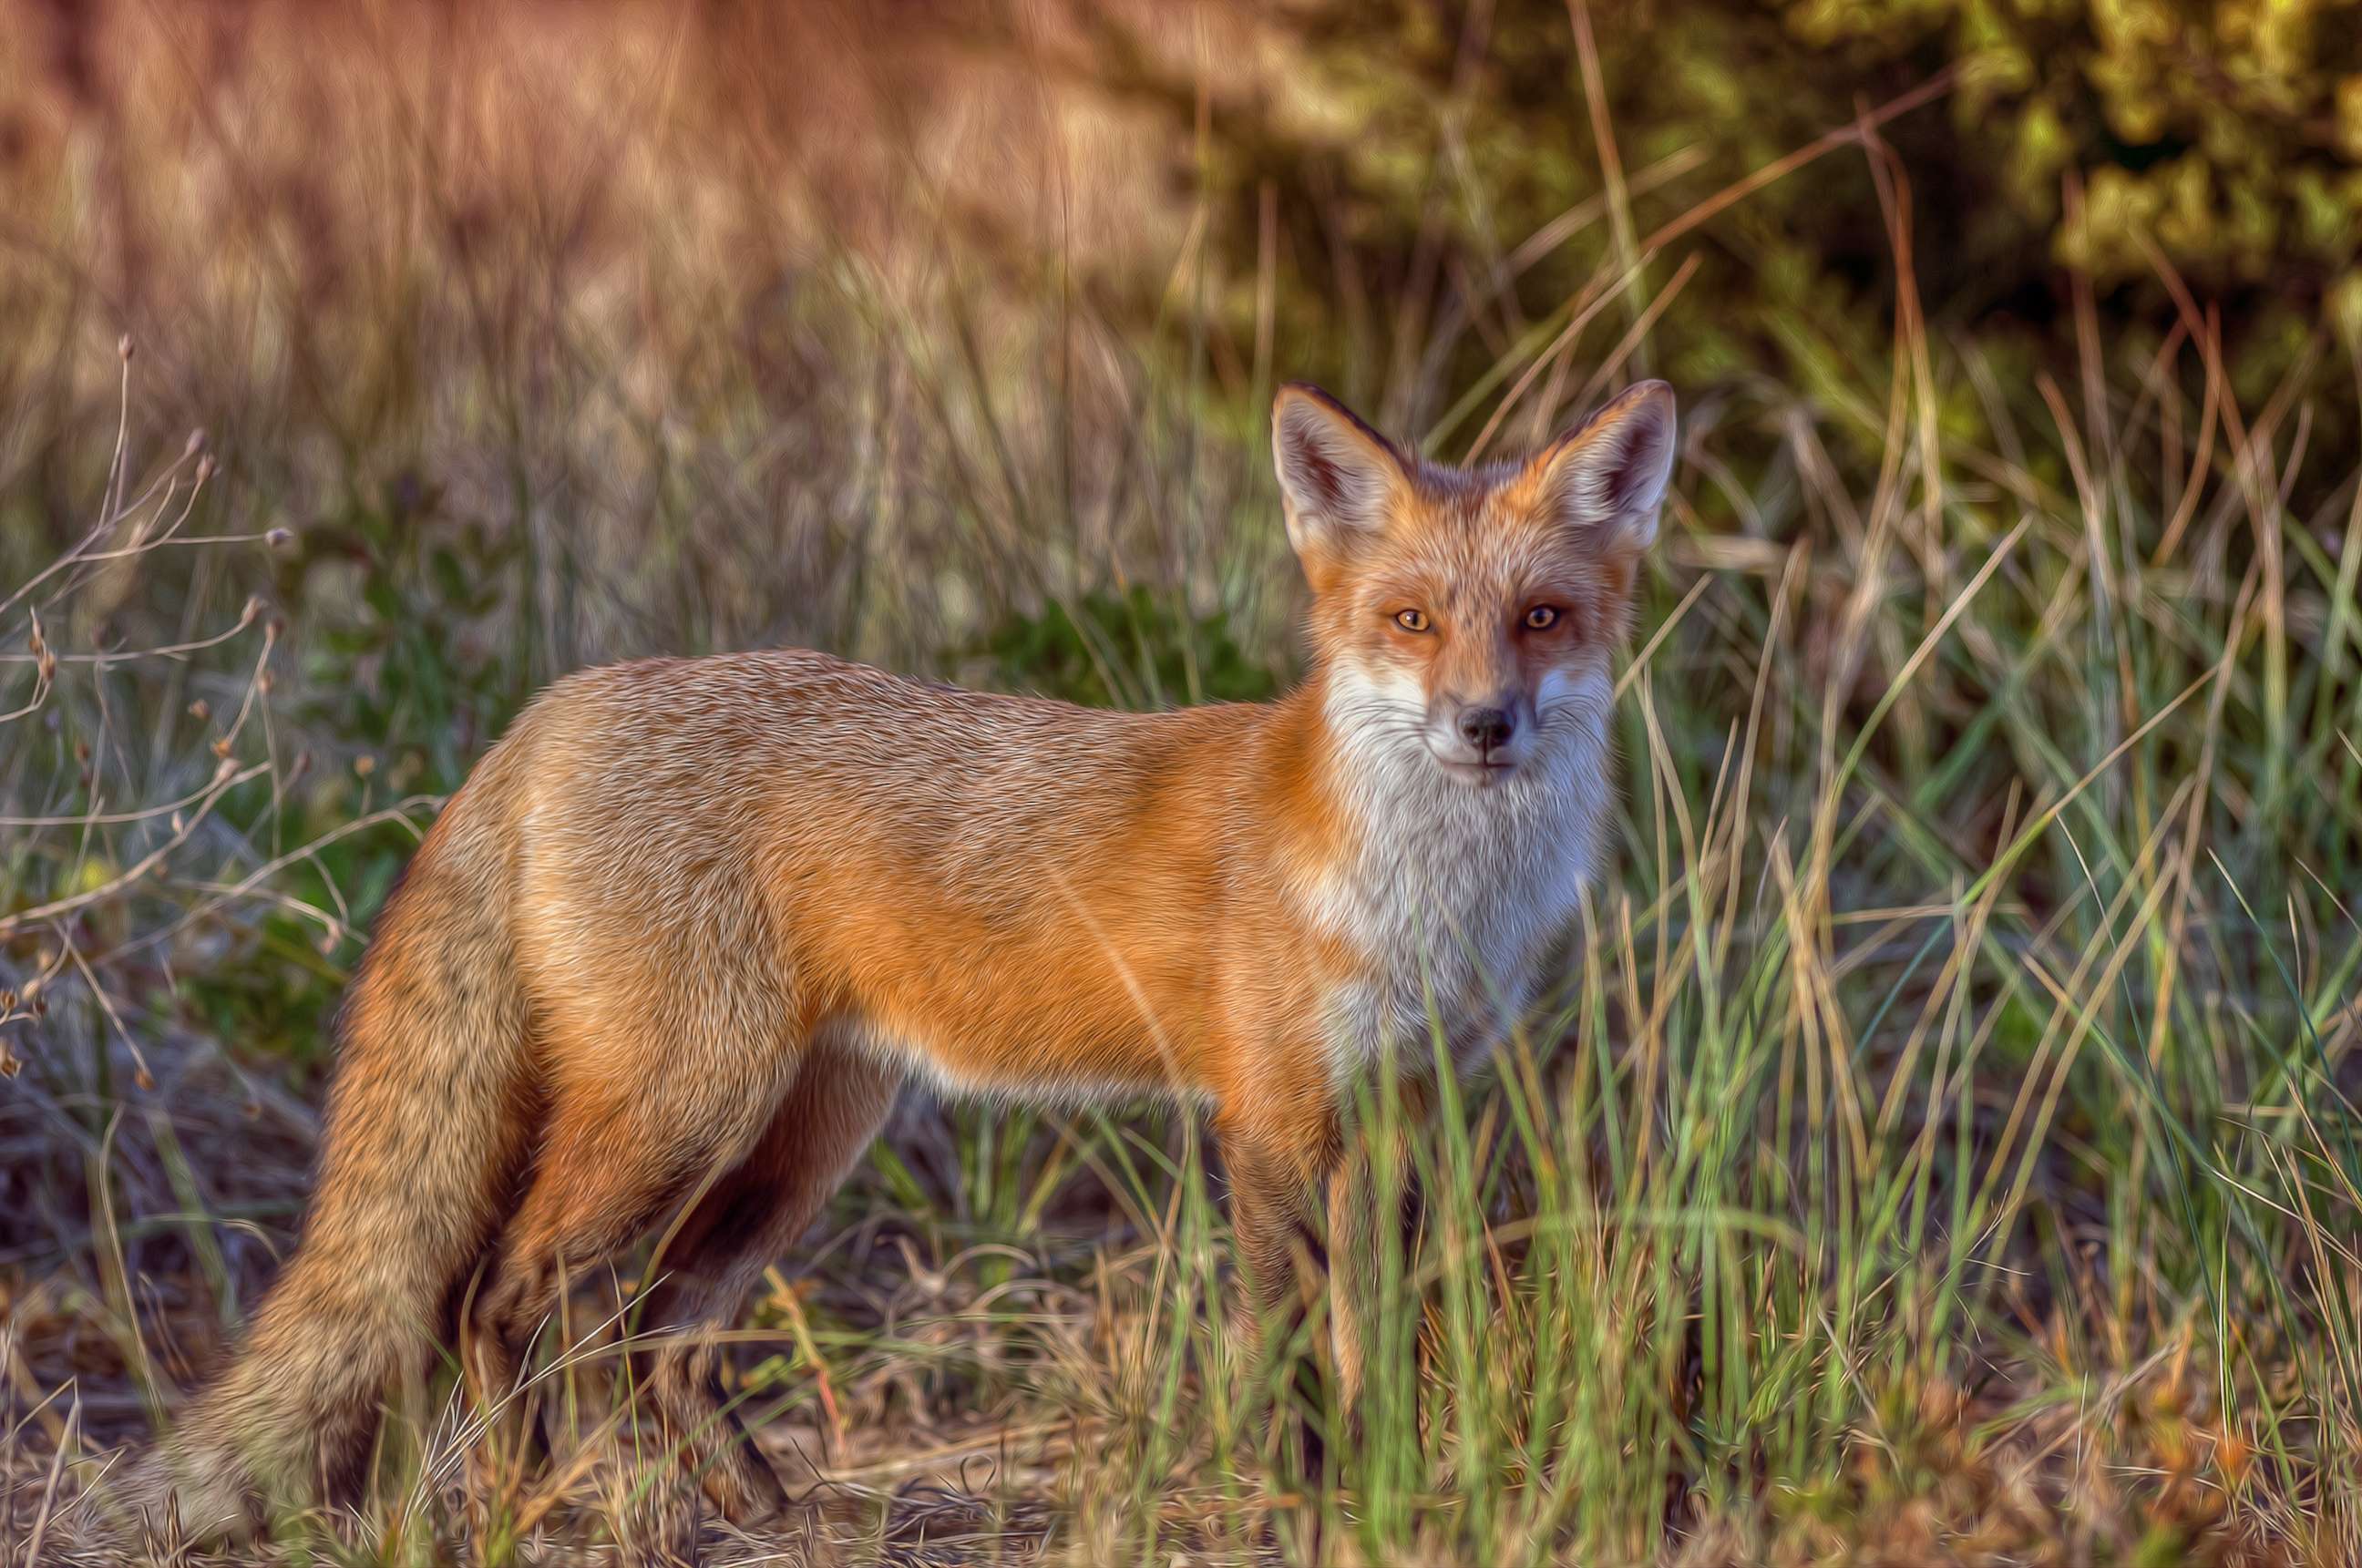 PHOTO: In this undated file photo, a wild red fox is shown in Seaside Heights, N.J.